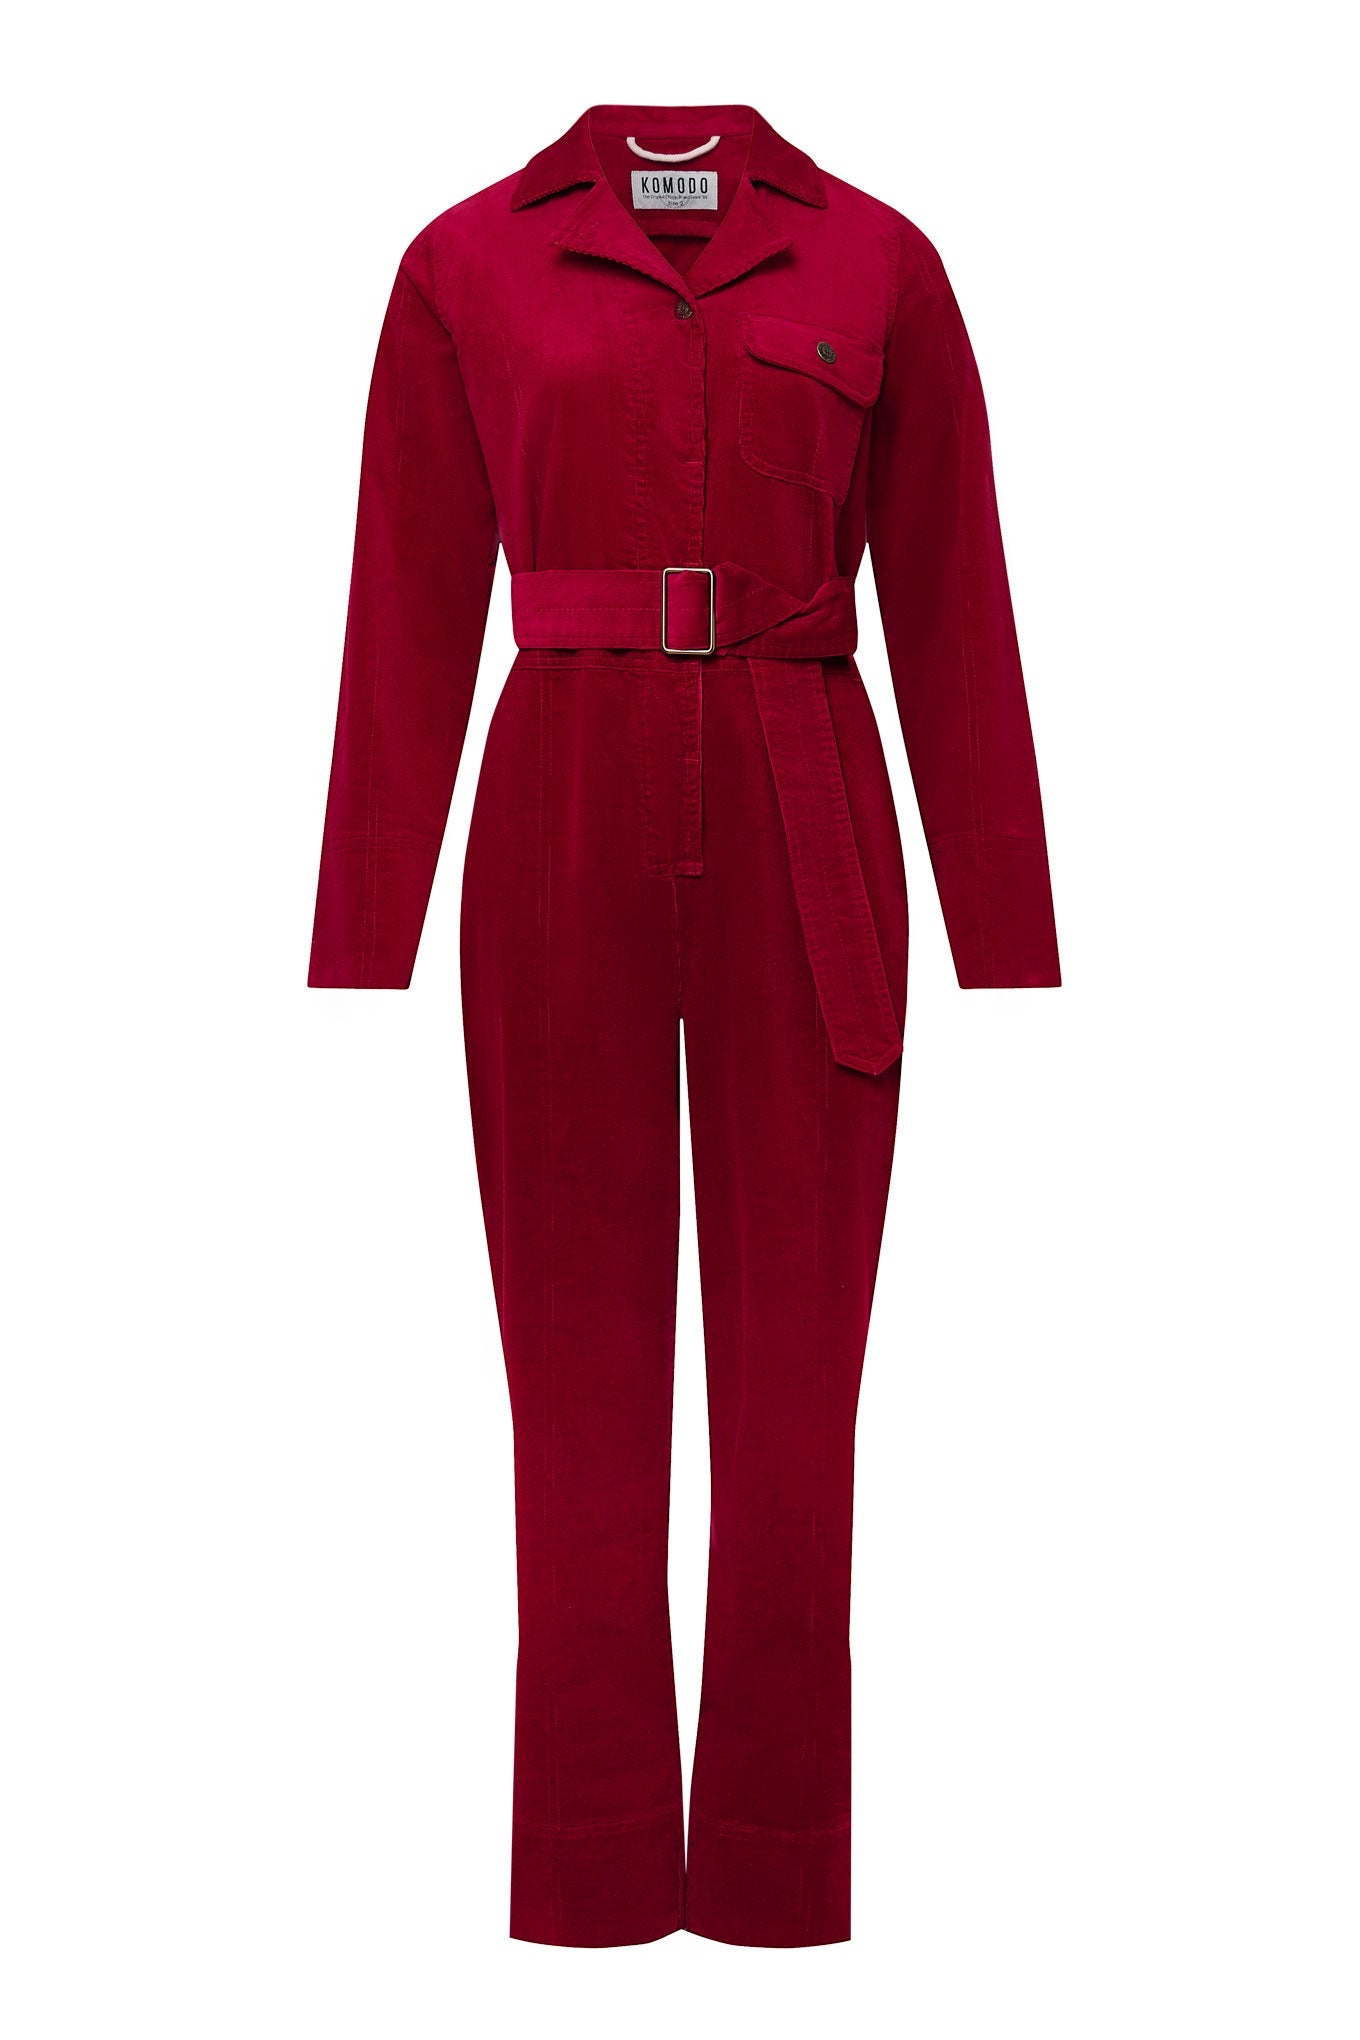 Cherry red corduroy jumpsuit ELECTRA made of organic cotton by Komodo